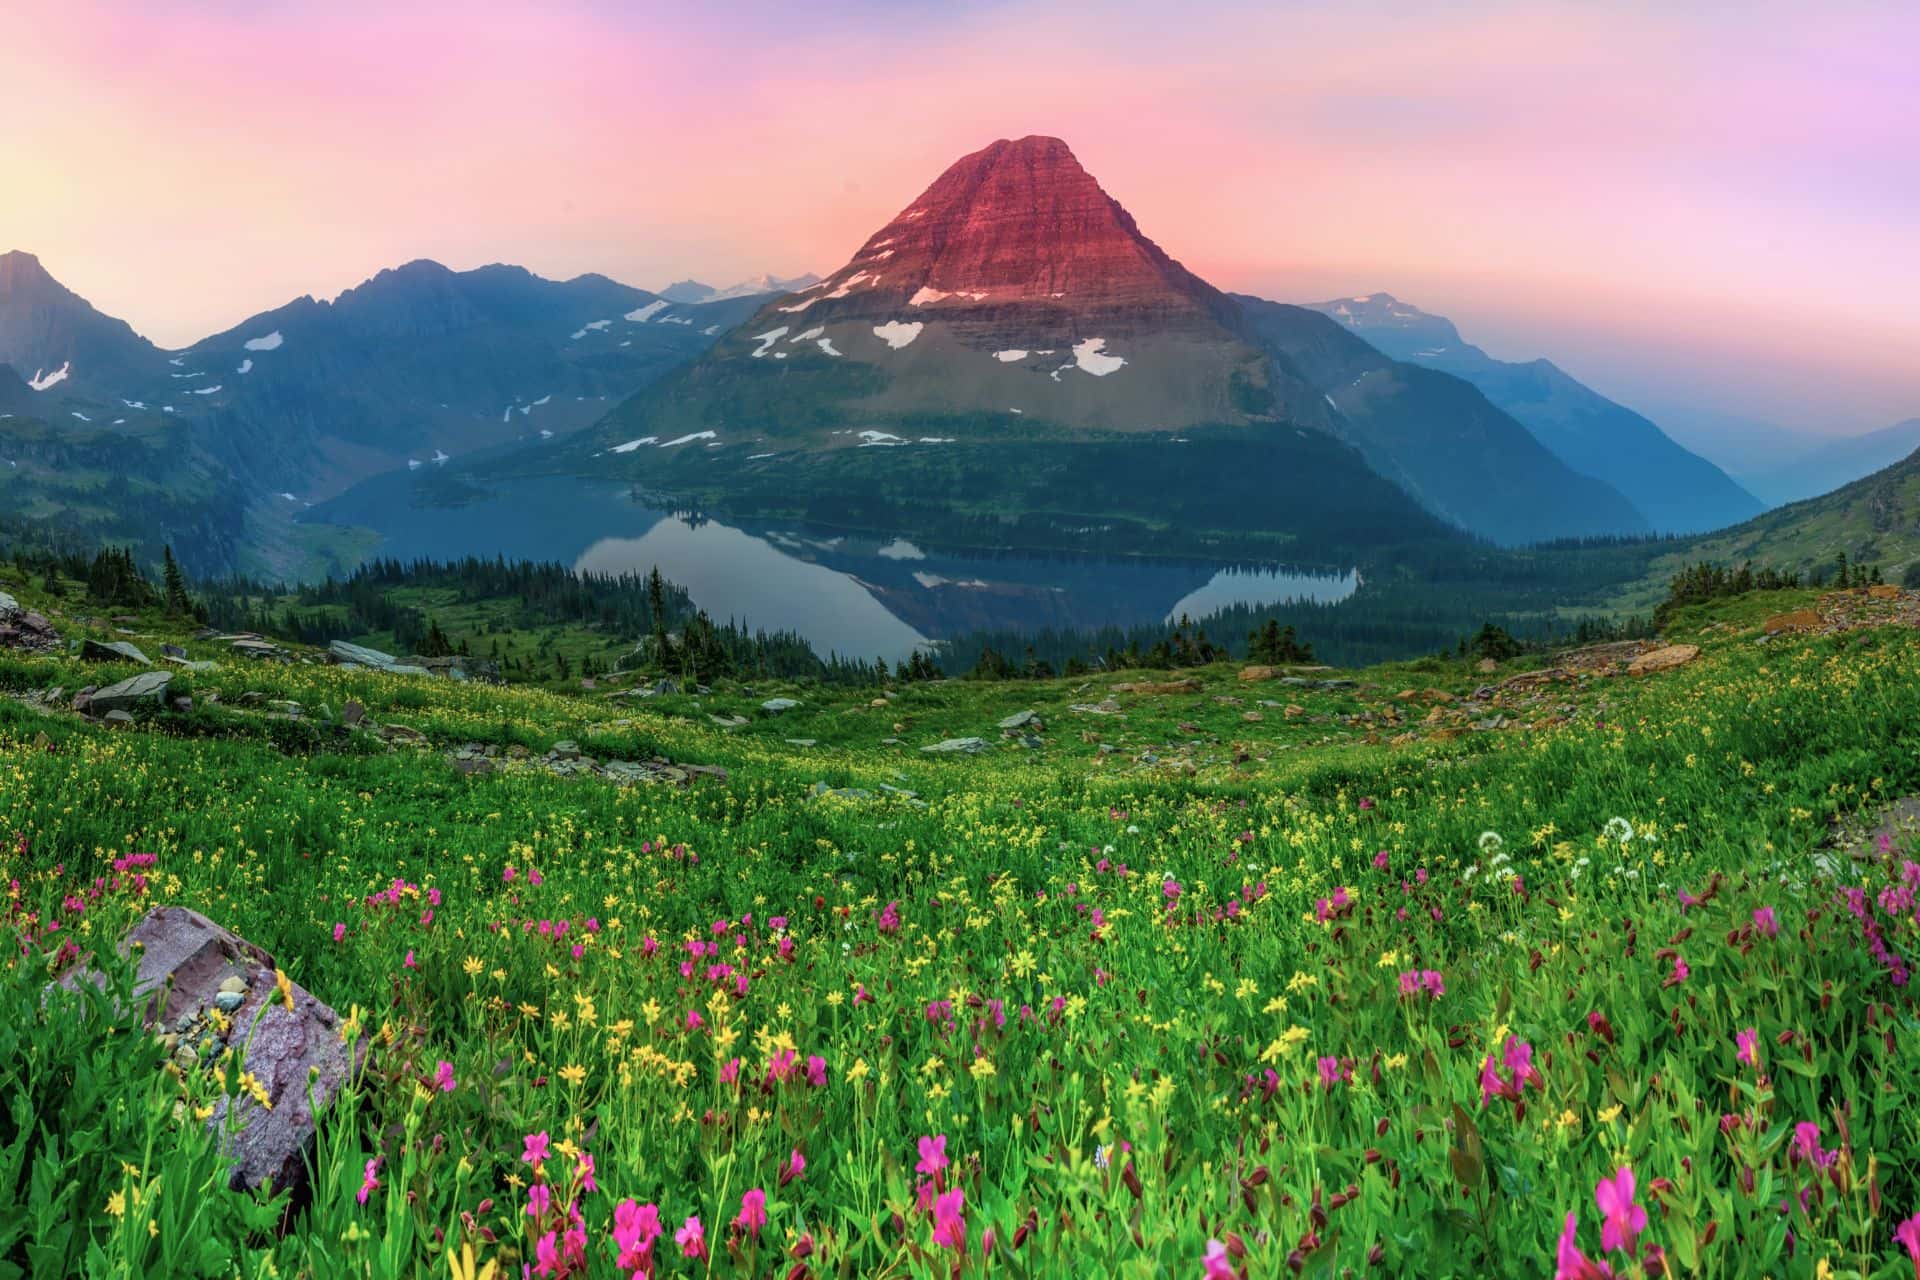 Best Photography Locations in Glacier National Park